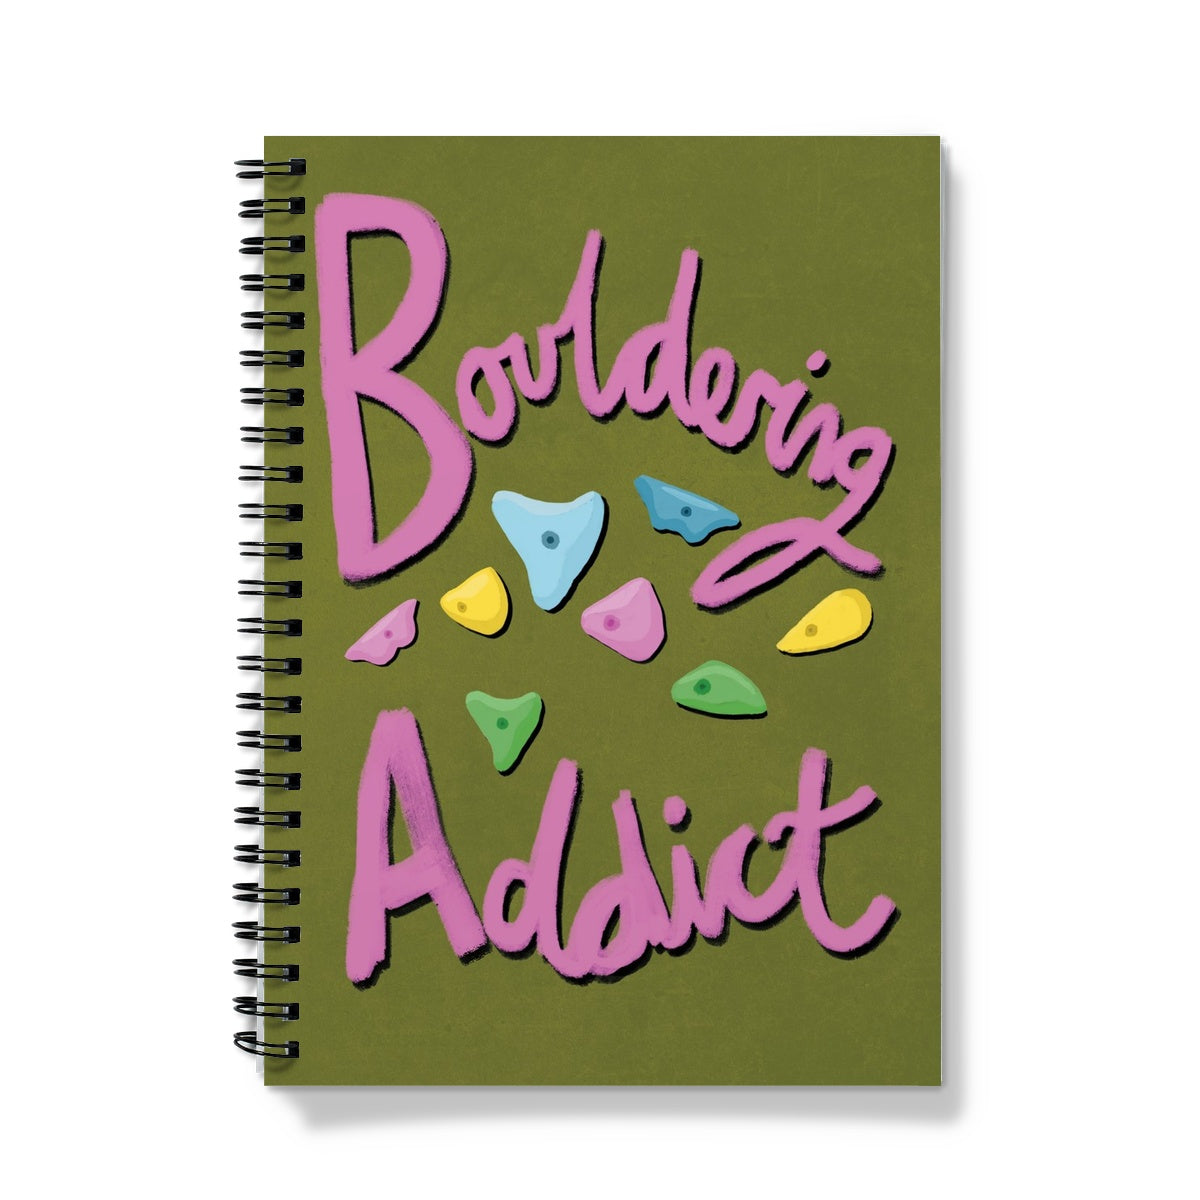 Bouldering Addict - Olive Green and Pink Notebook